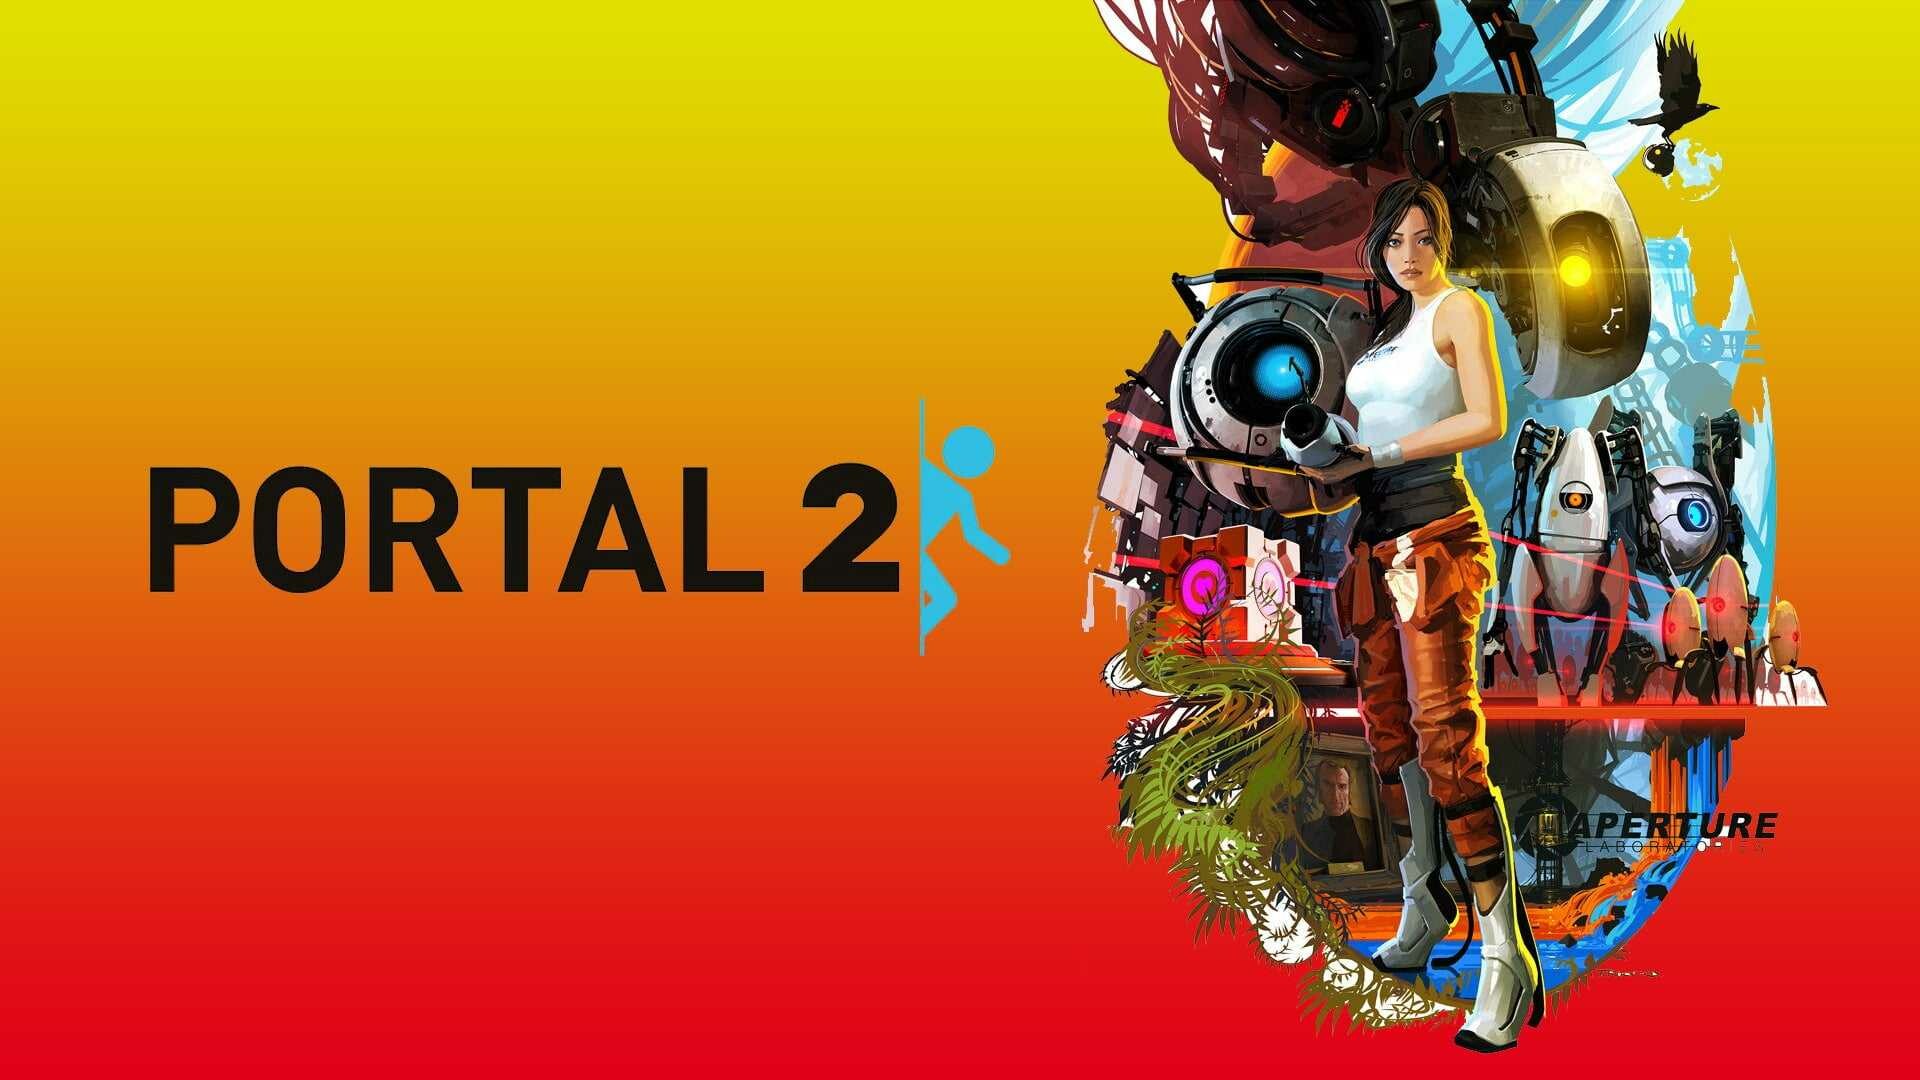 Portal 2 (Game): Provides voice communication between players, and online players can temporarily enter a split-screen view to help coordinate actions. 1920x1080 Full HD Background.